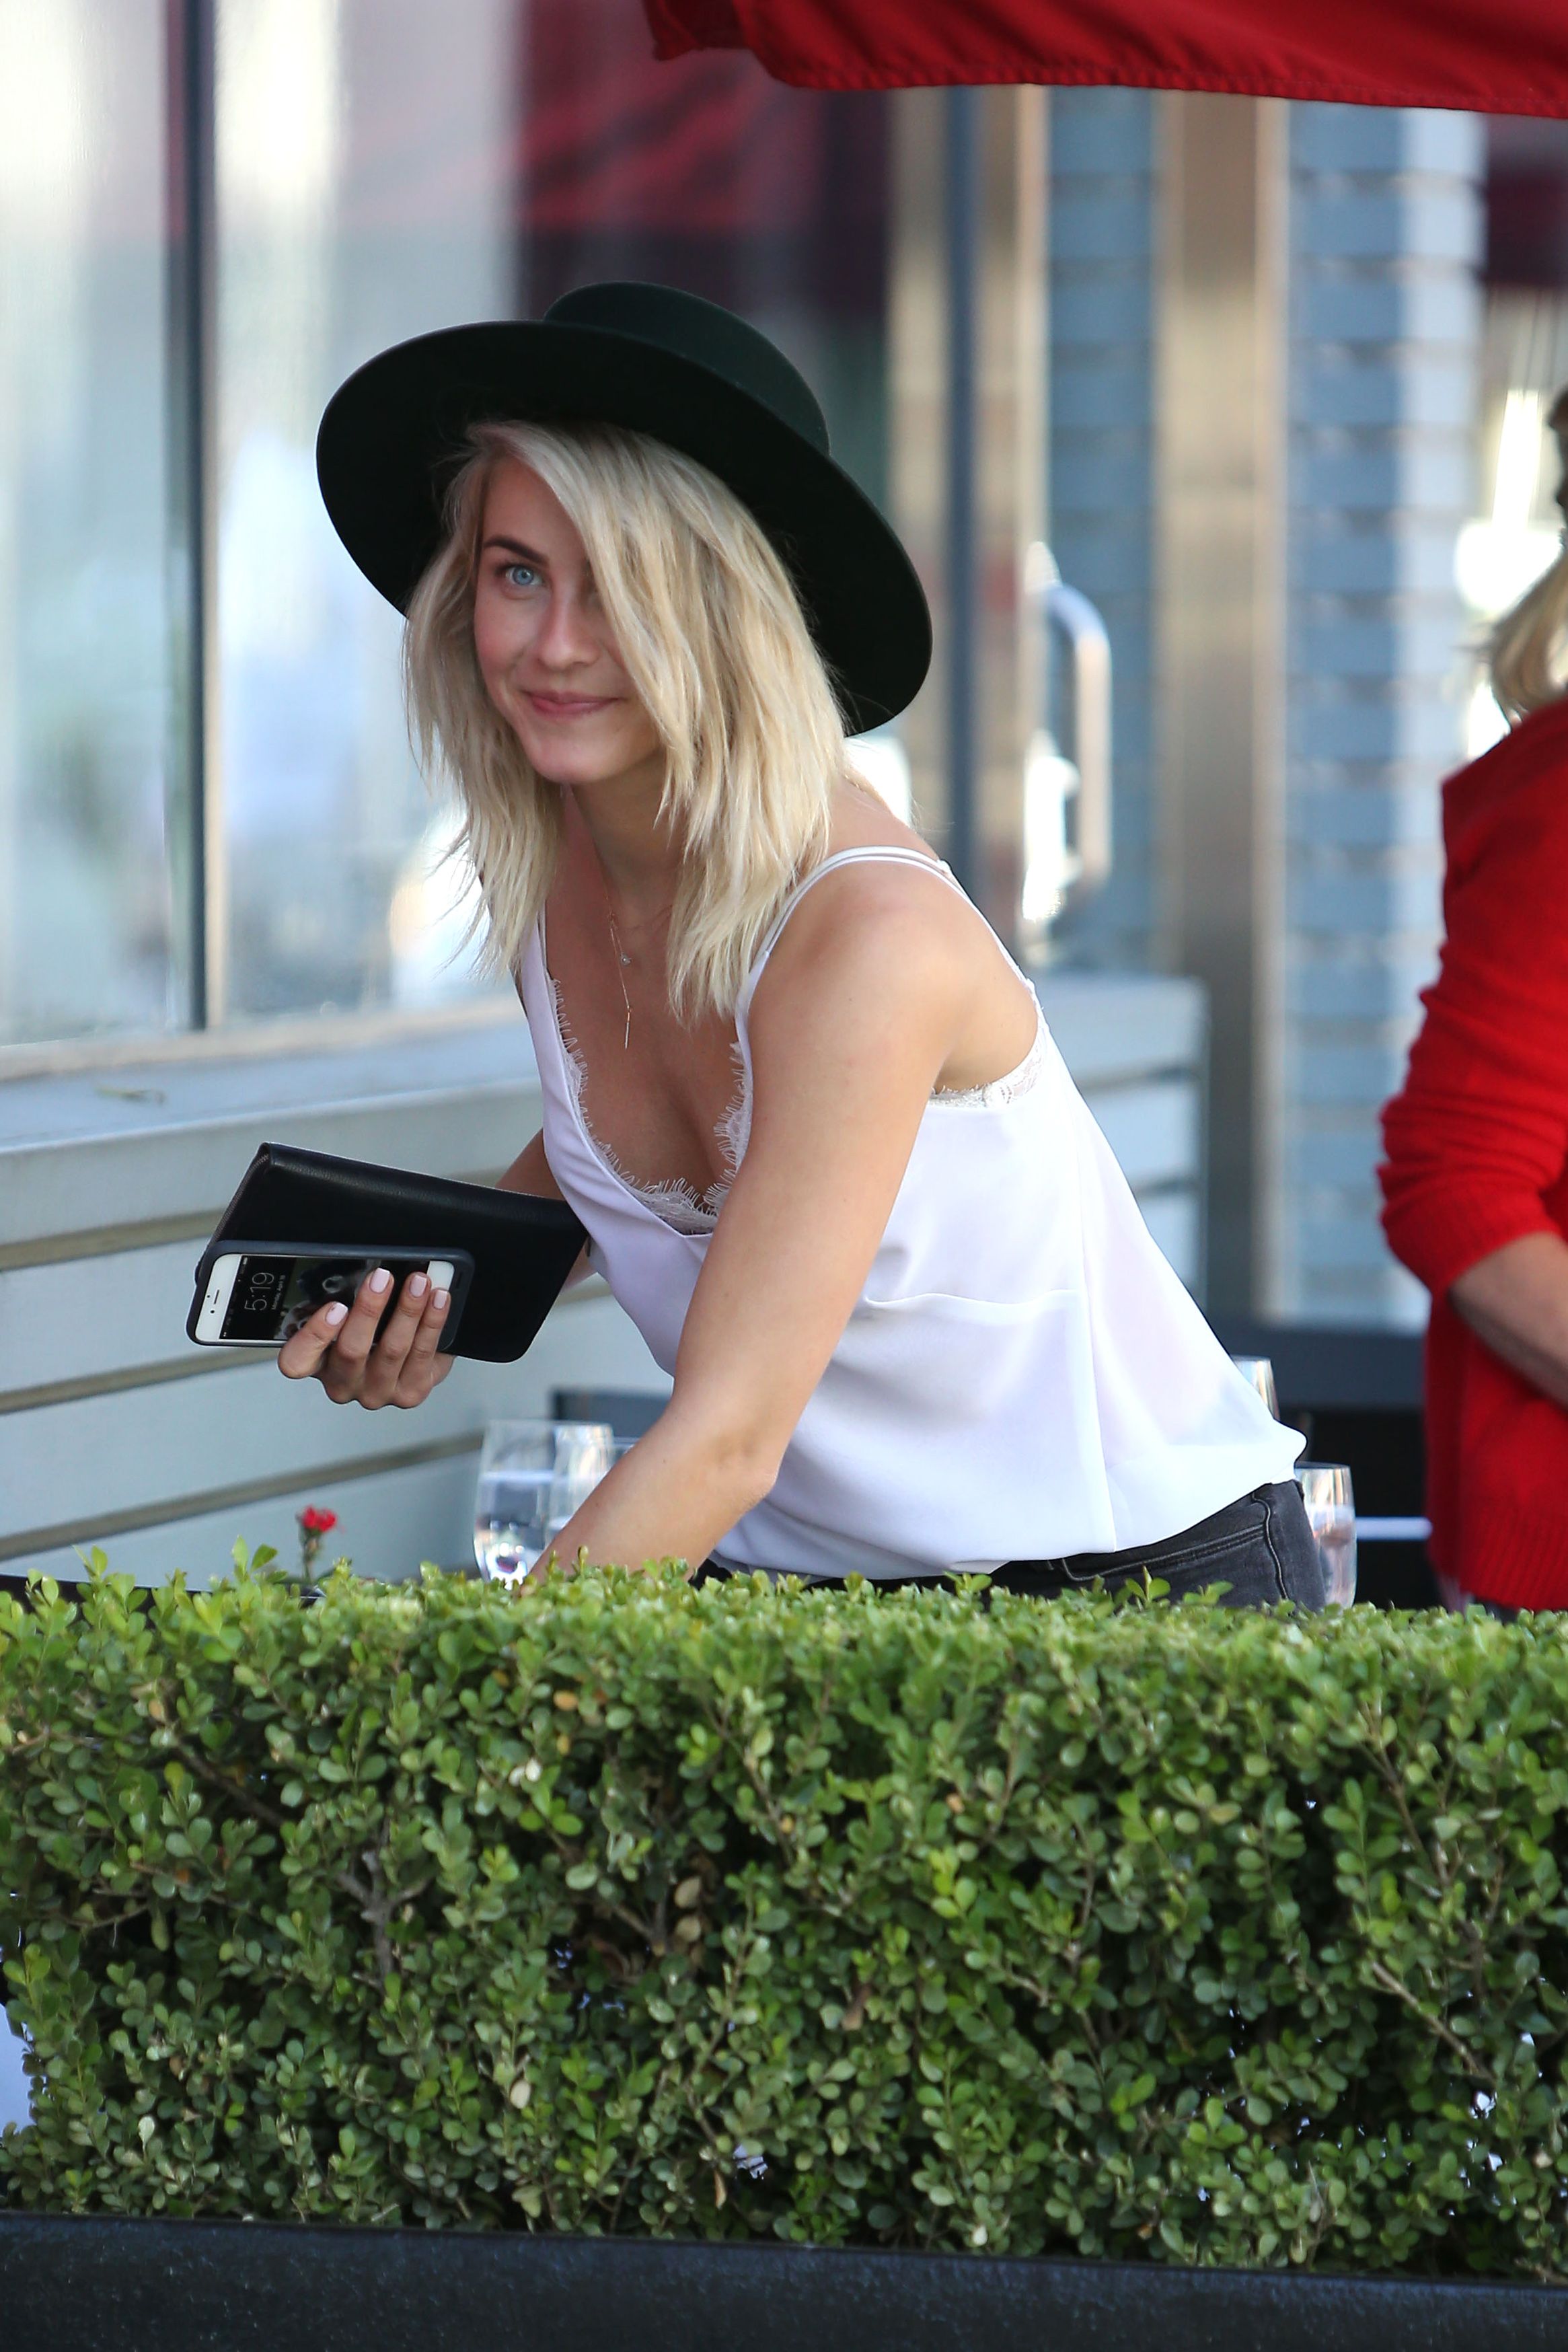 julianne-hough-downblouse-cleavage-in-west-hollywood-04.jpg